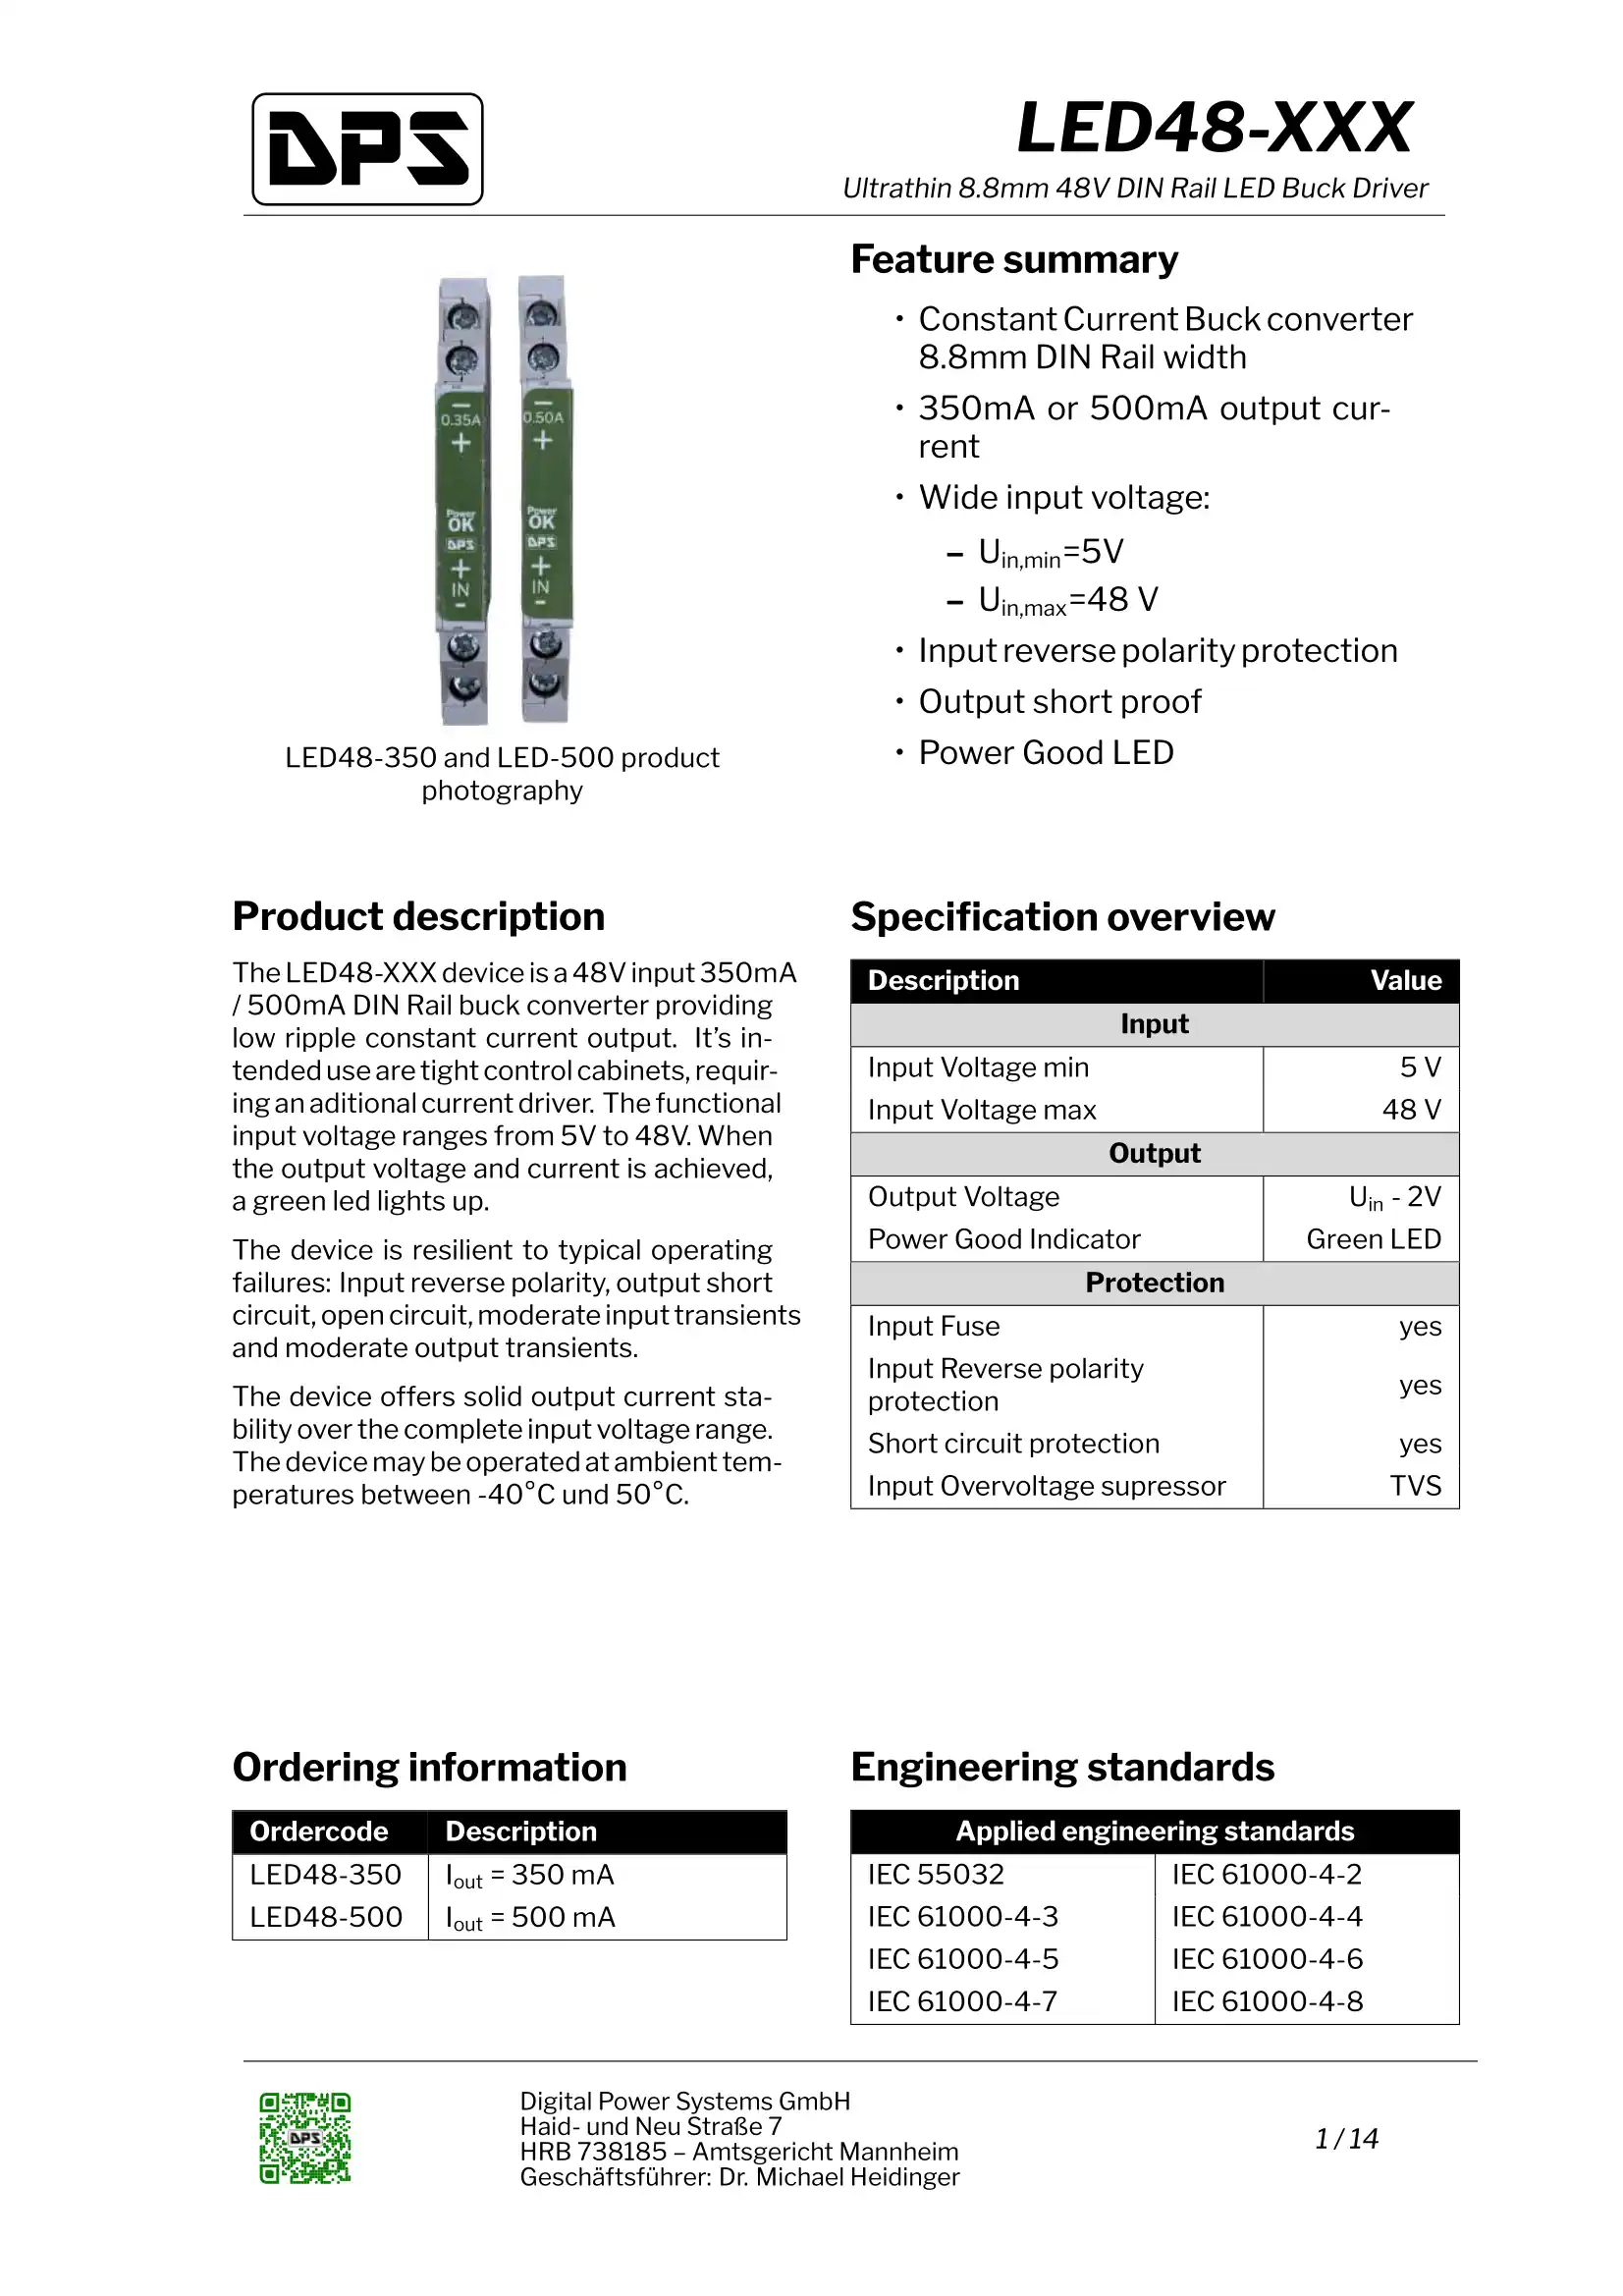 DPS LED48 Datasheet First Page